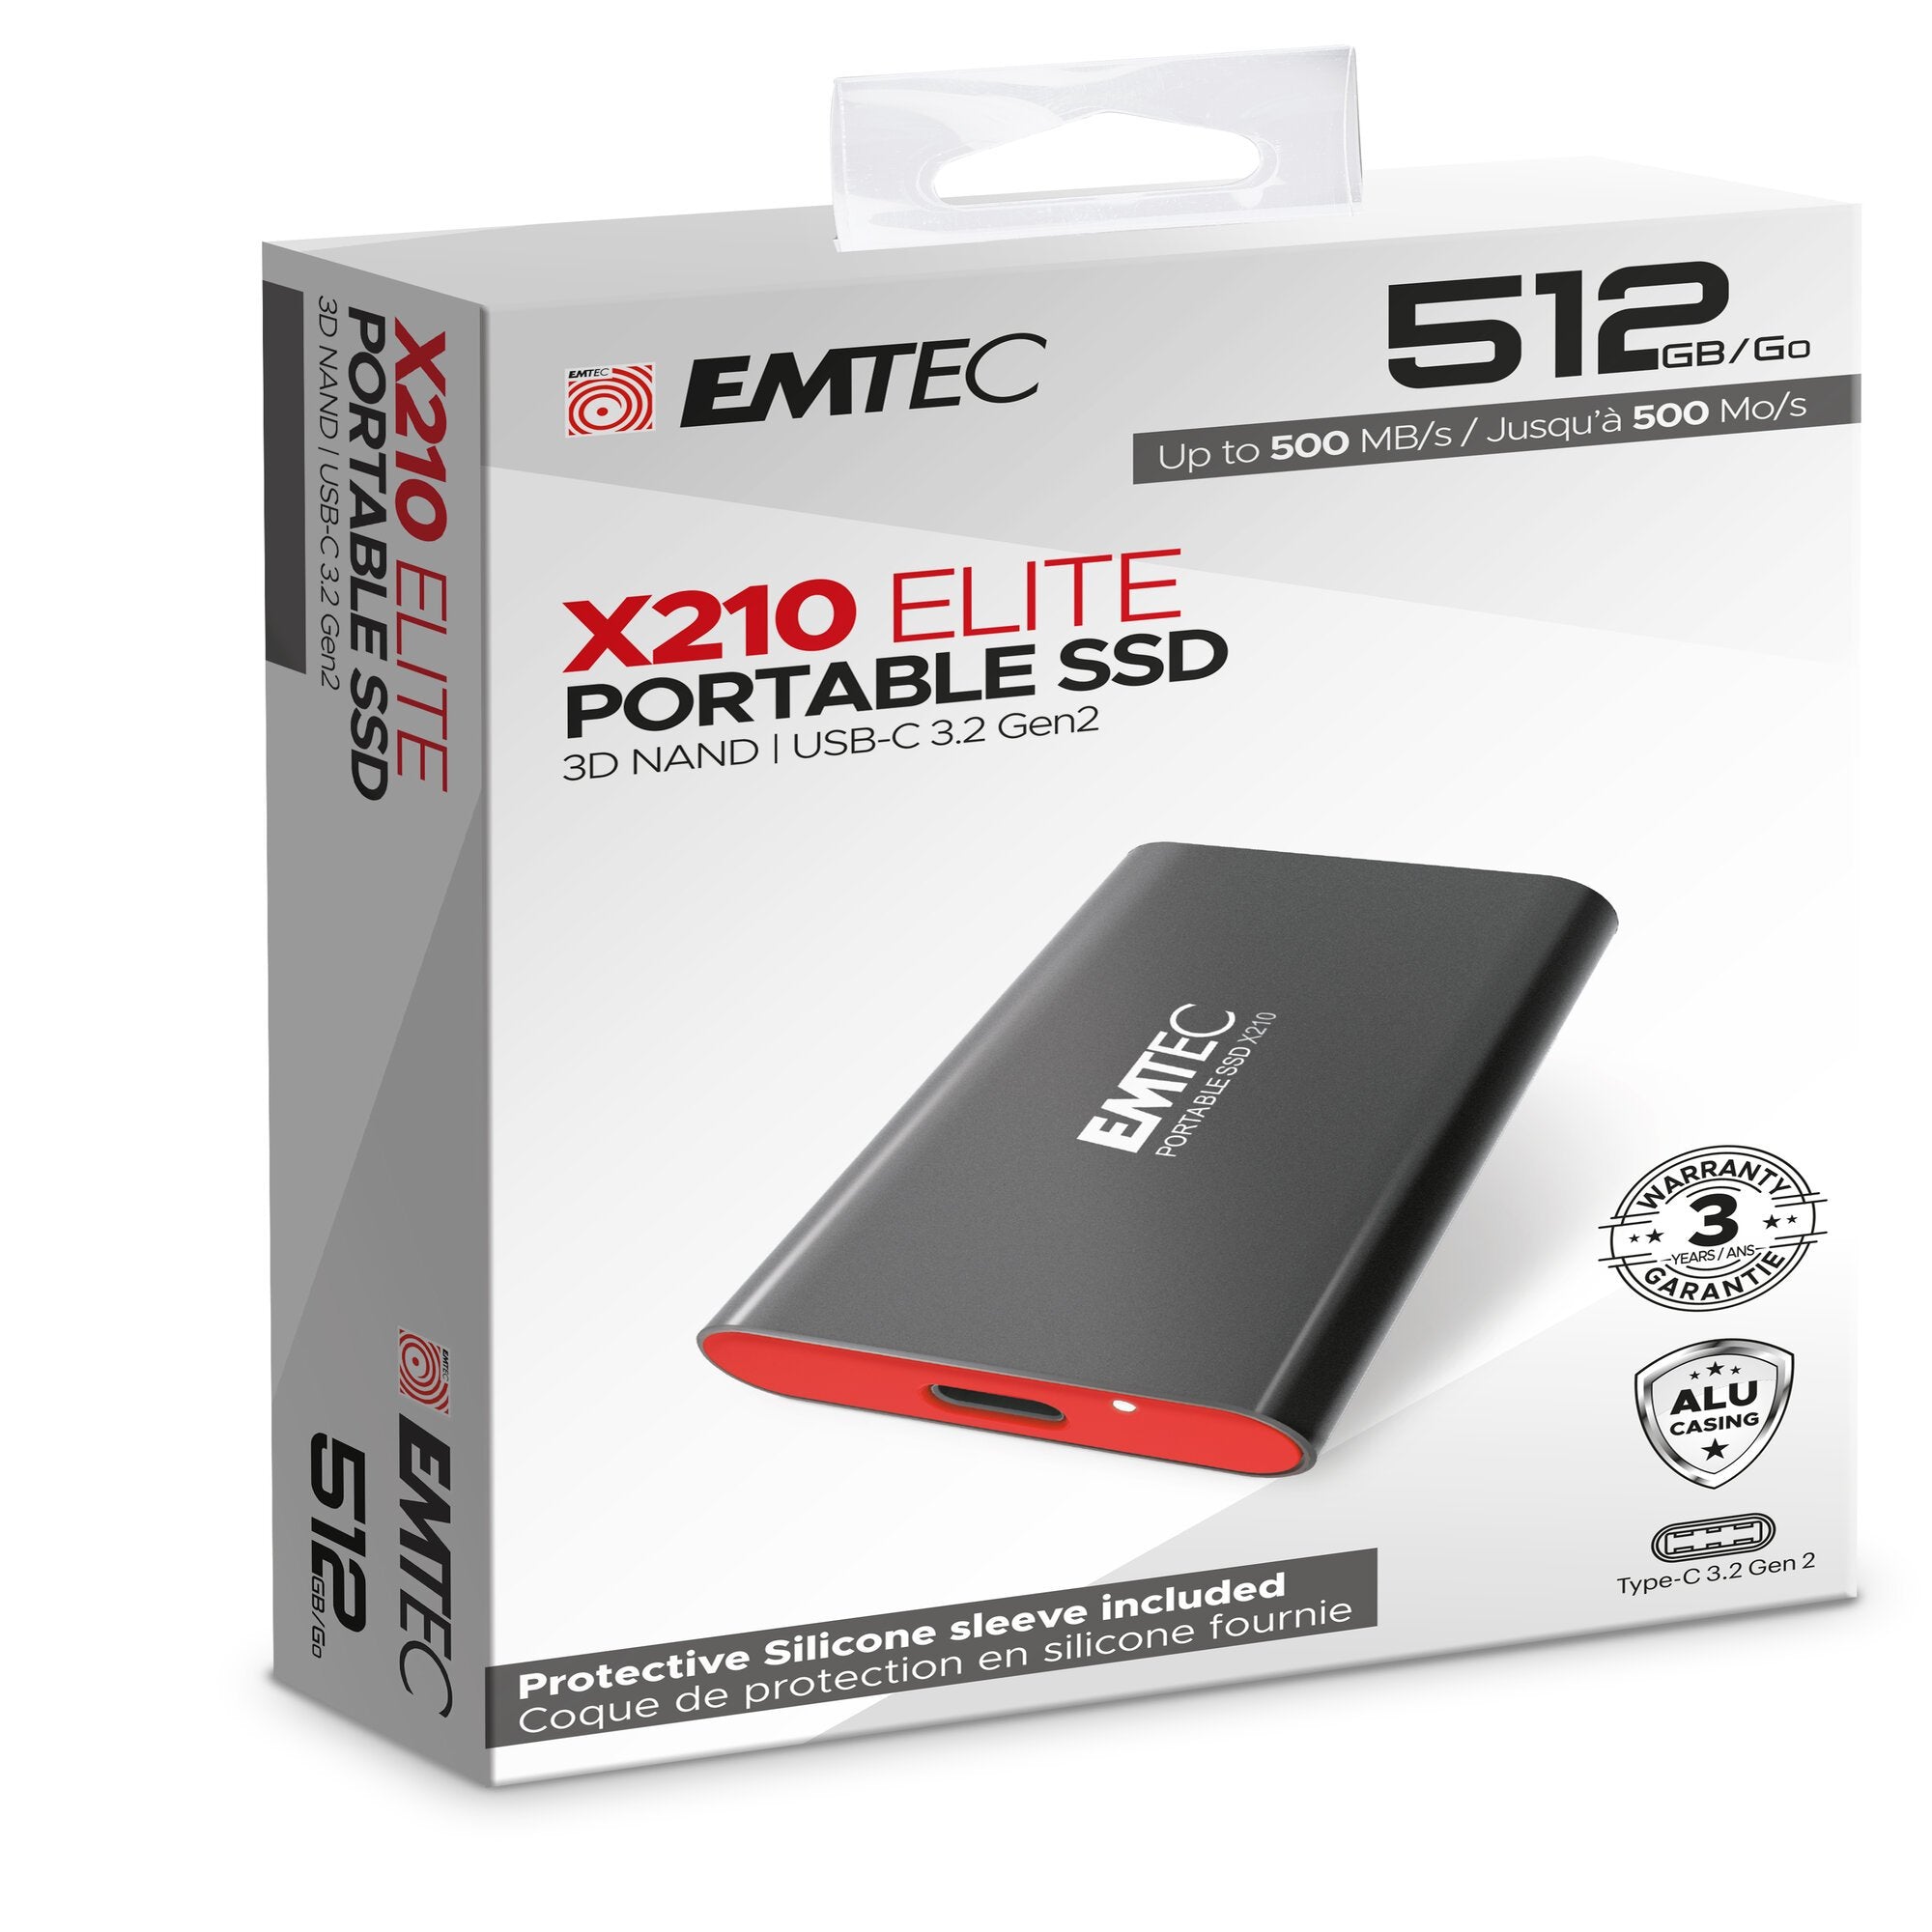 emtec-x210-external-512g-cover-protettiva-silicone